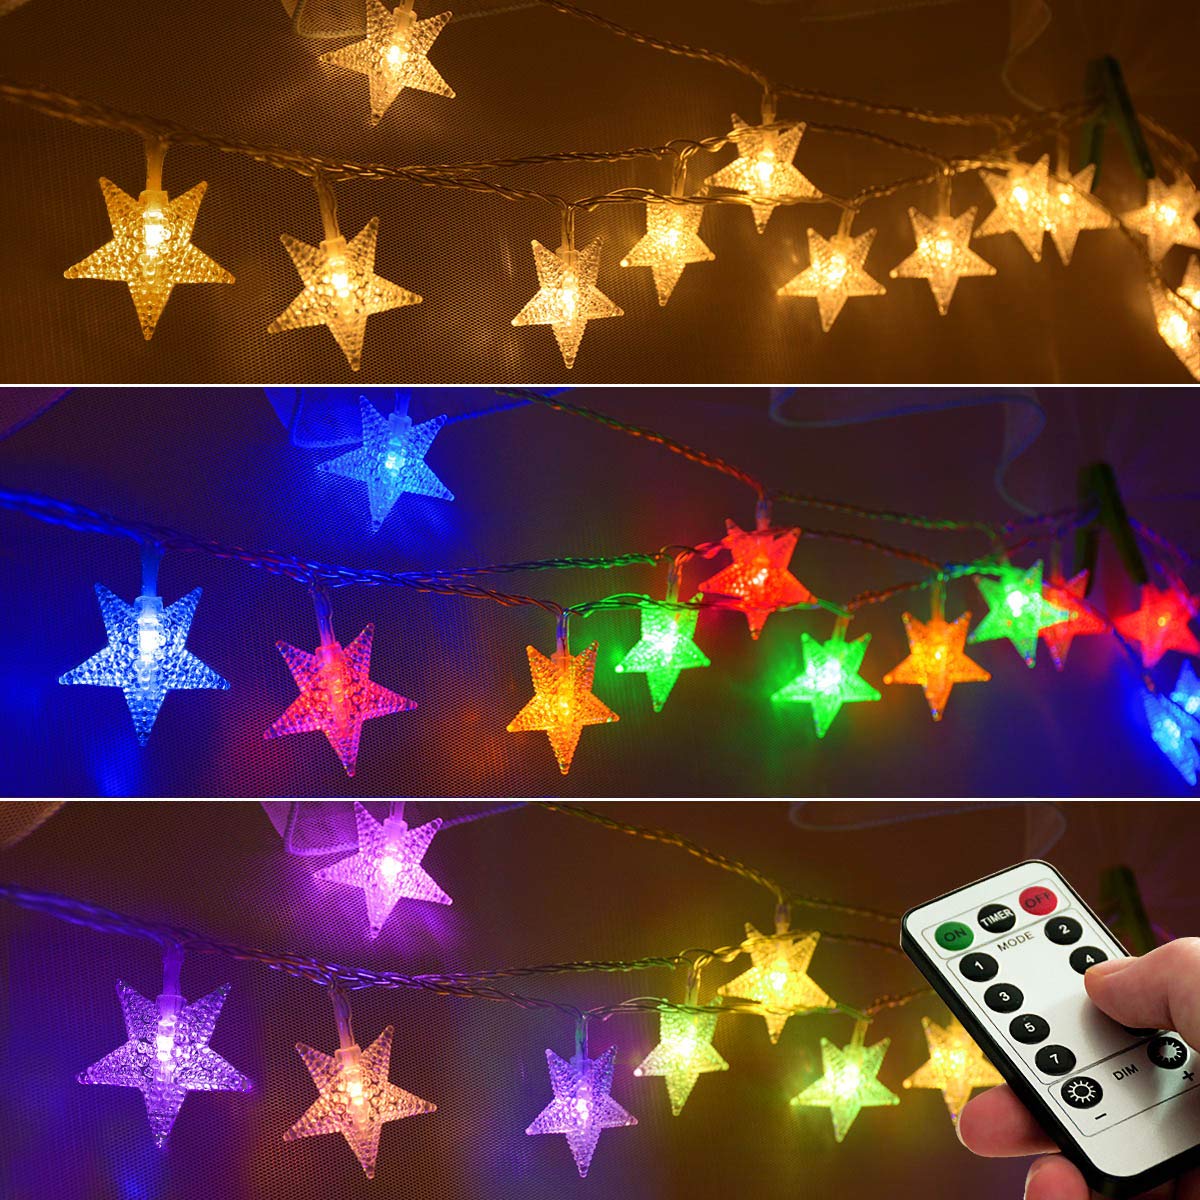 Homeleo 25ft 50 LED Multicolor Star String Lights for Bedroom Decorations, Battery Operated Led Christmas Lights for Apartment D